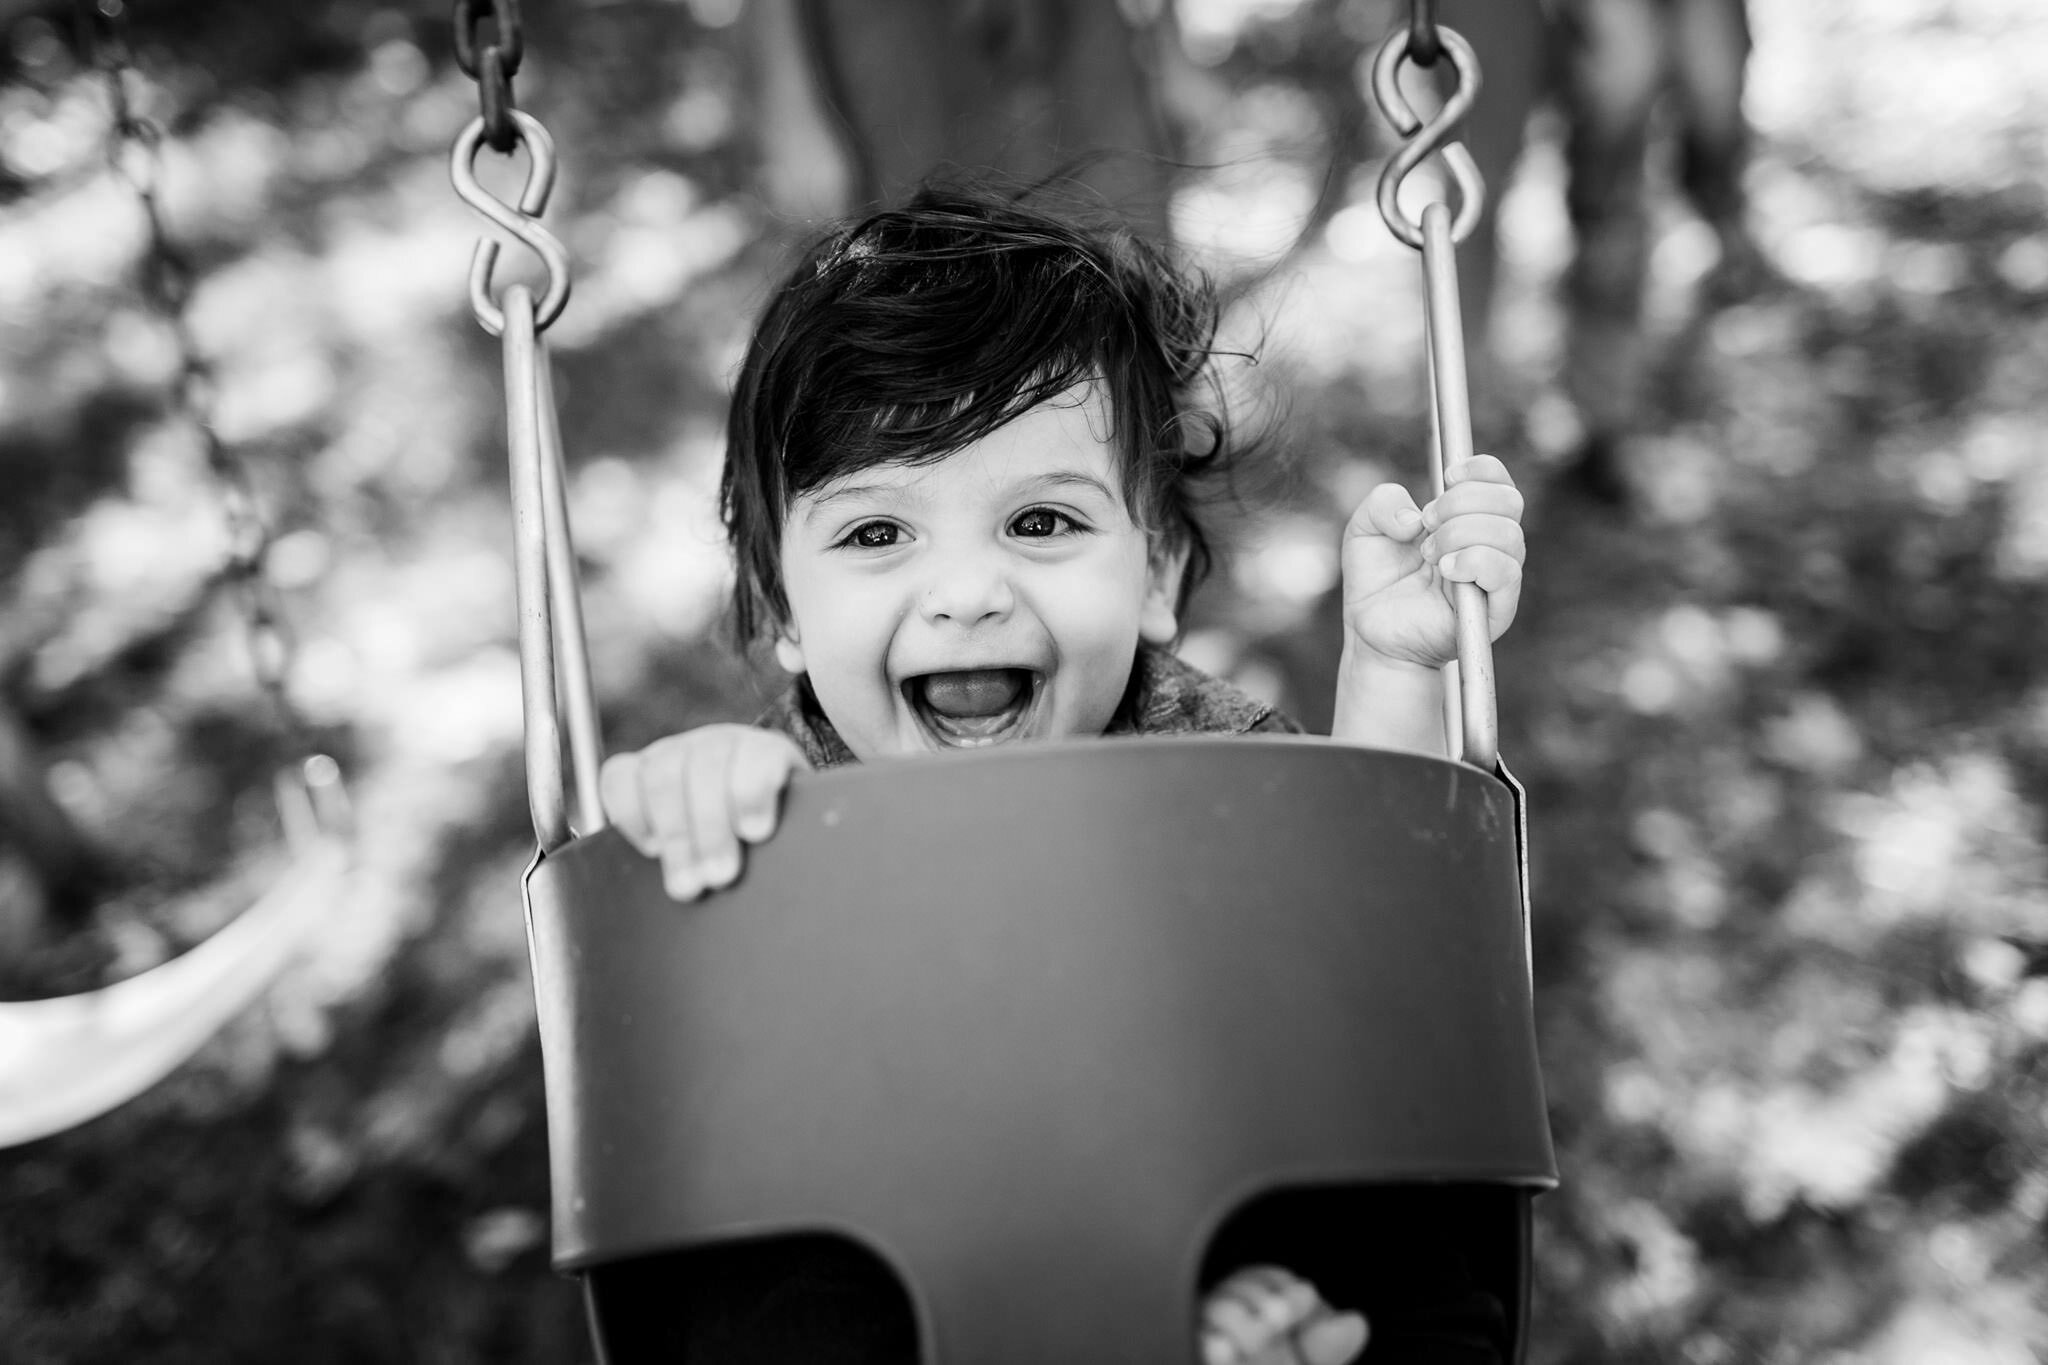 Durham Family Photographer | By G. Lin Photography | Baby boy smiling on swing